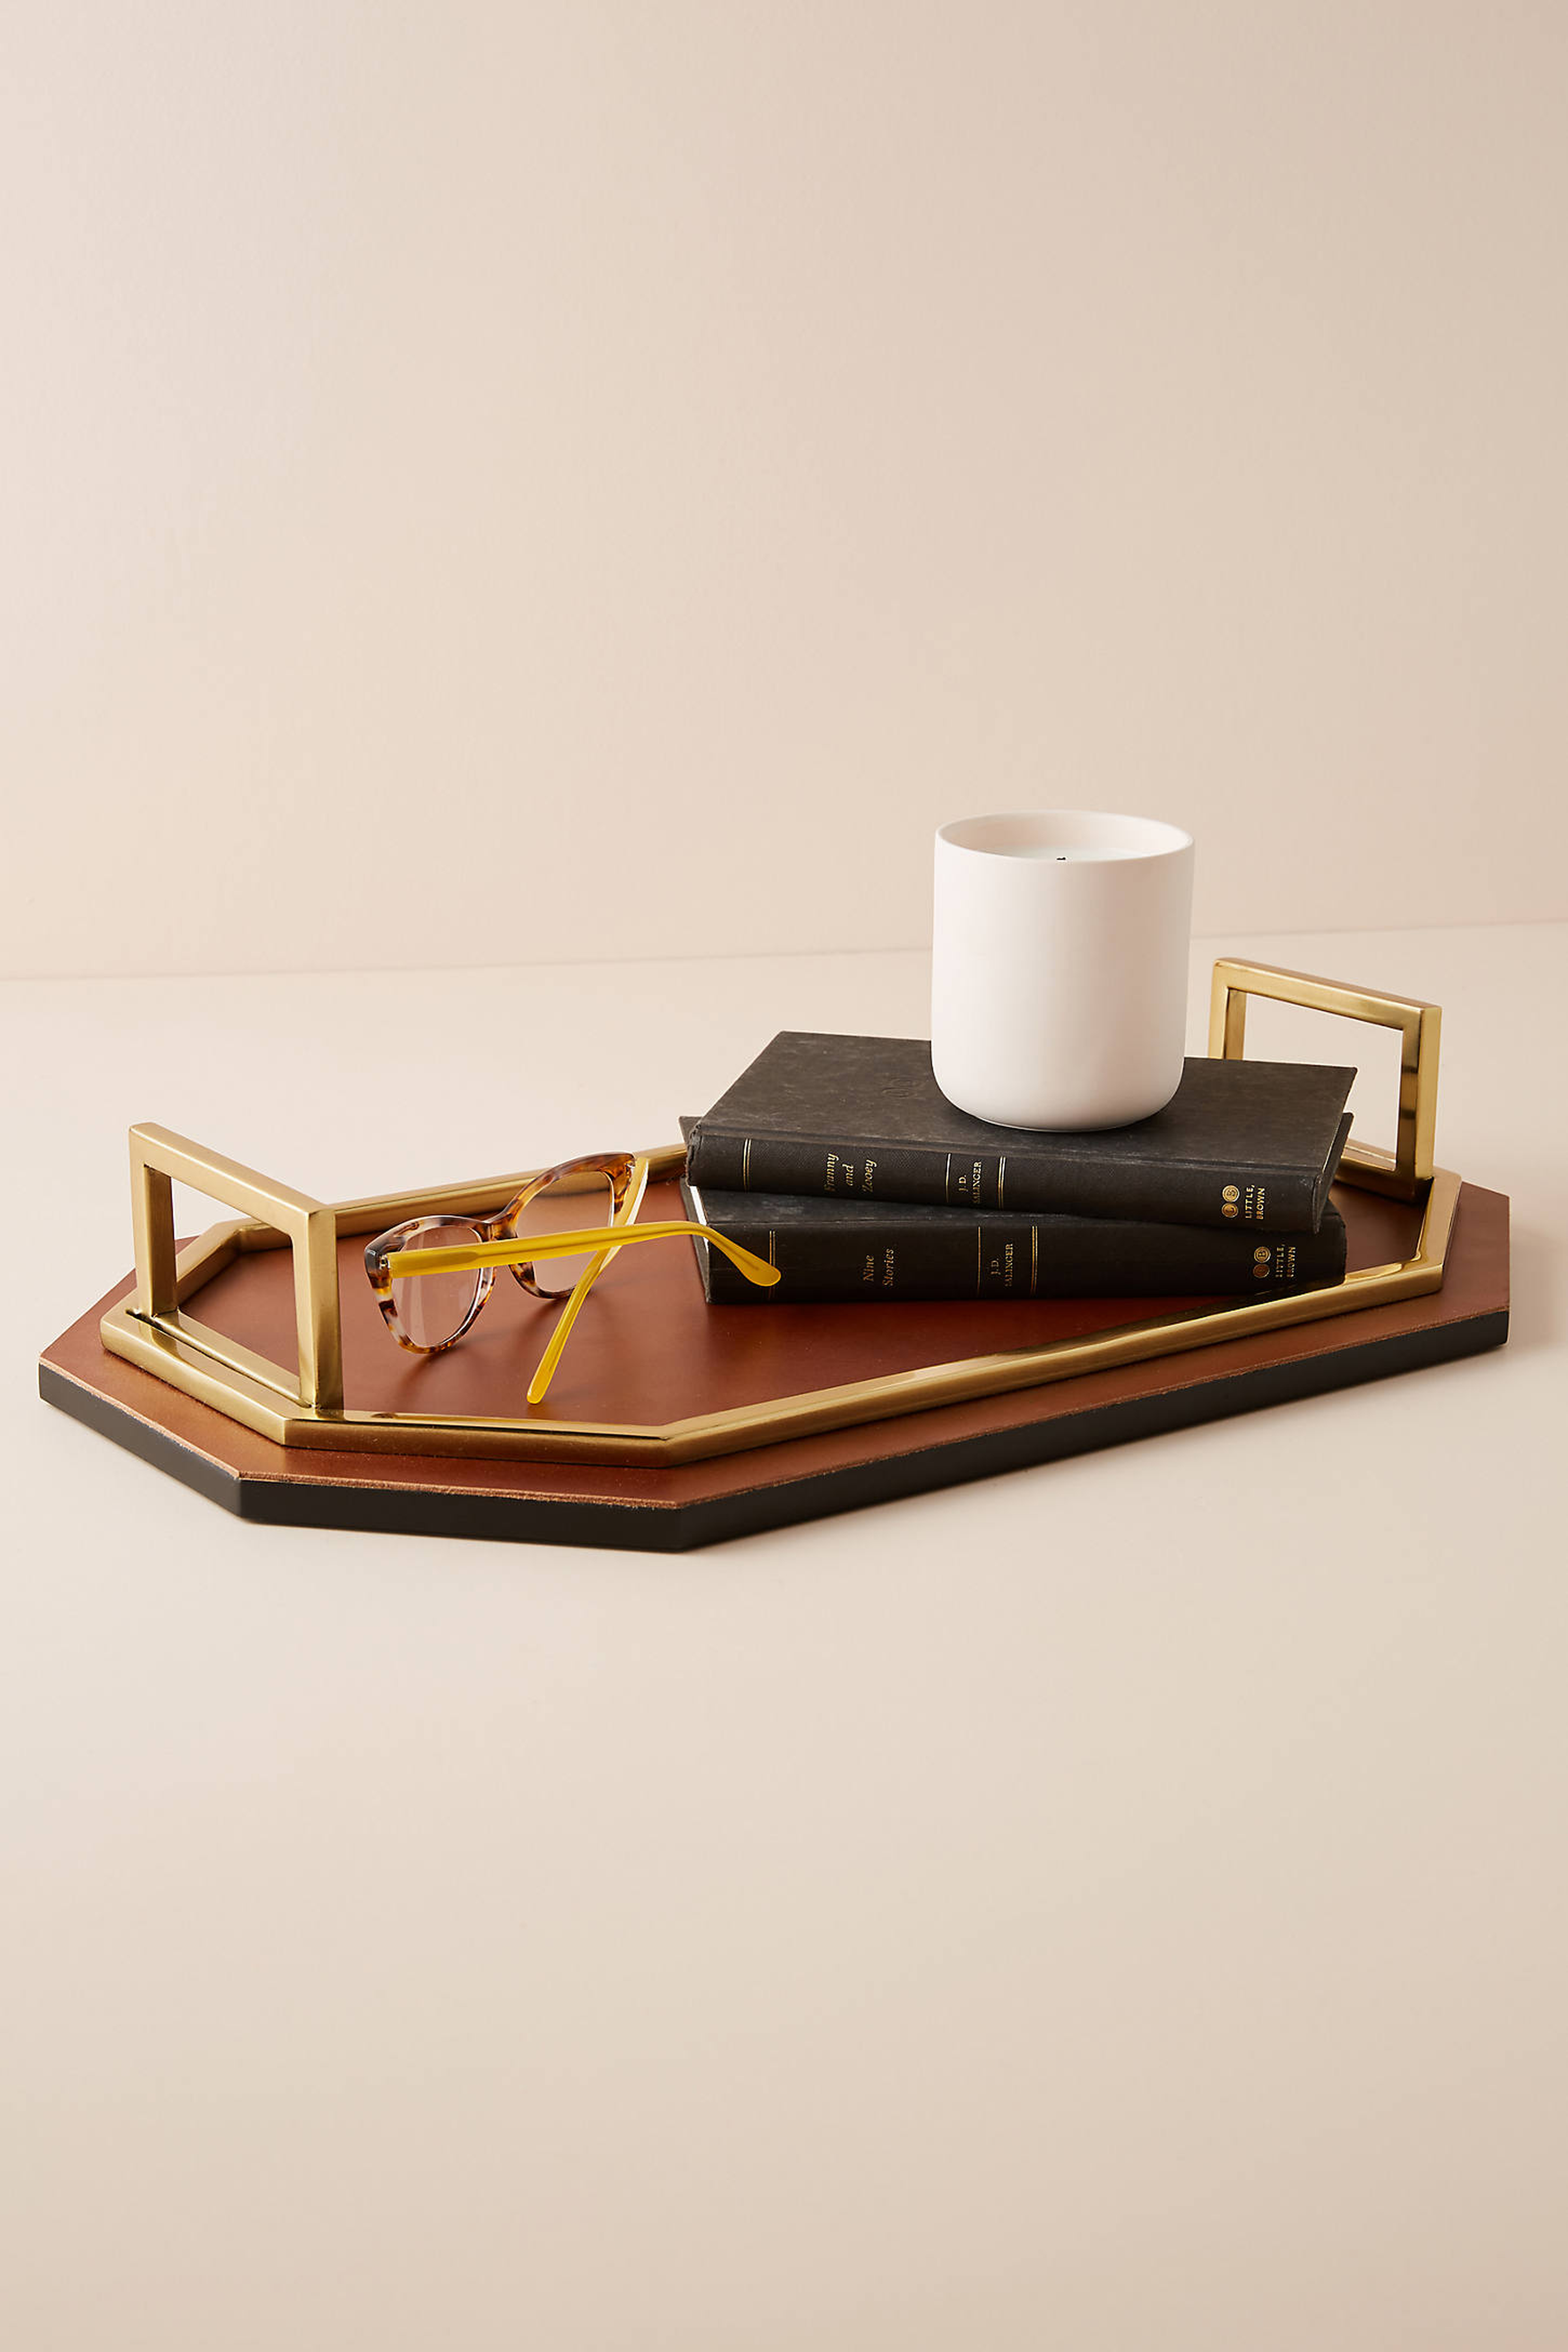 Charles Decorative Tray - Anthropologie